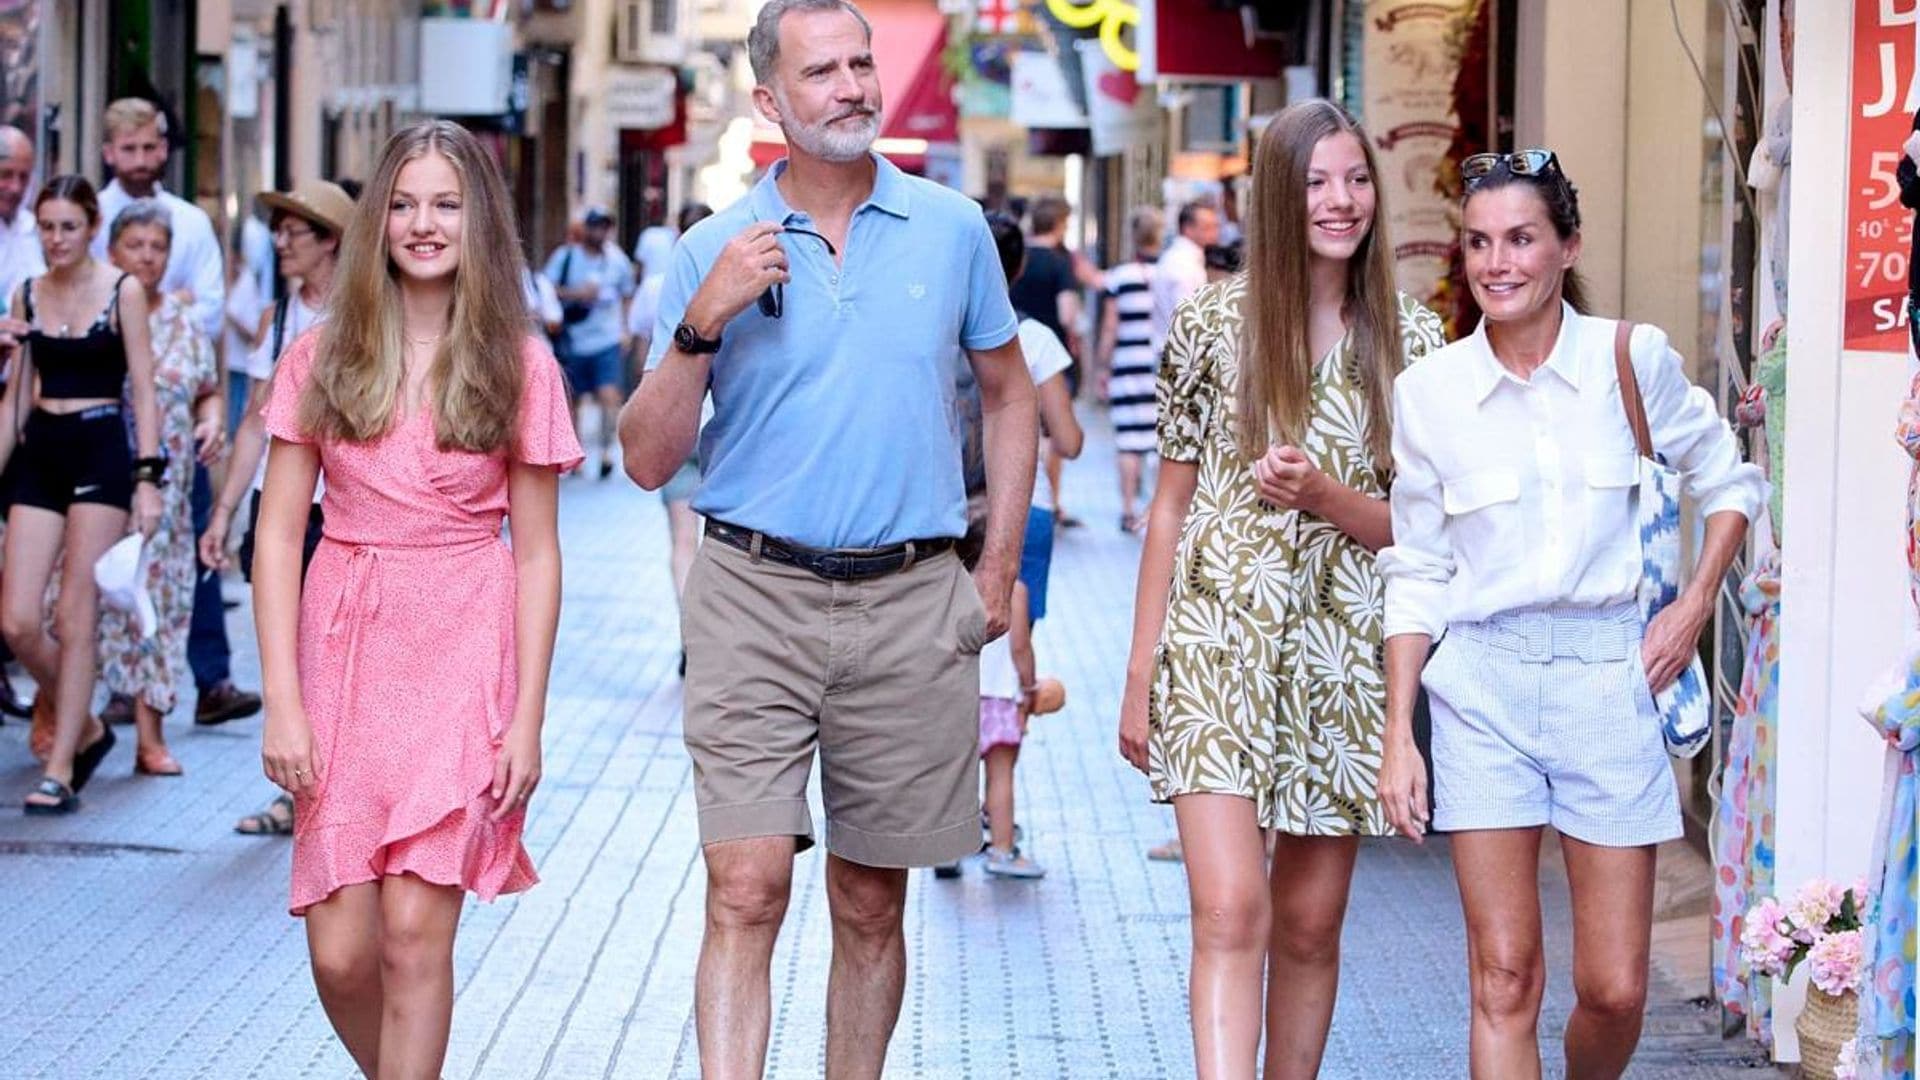 Spanish royals show off their vacation style during family stroll